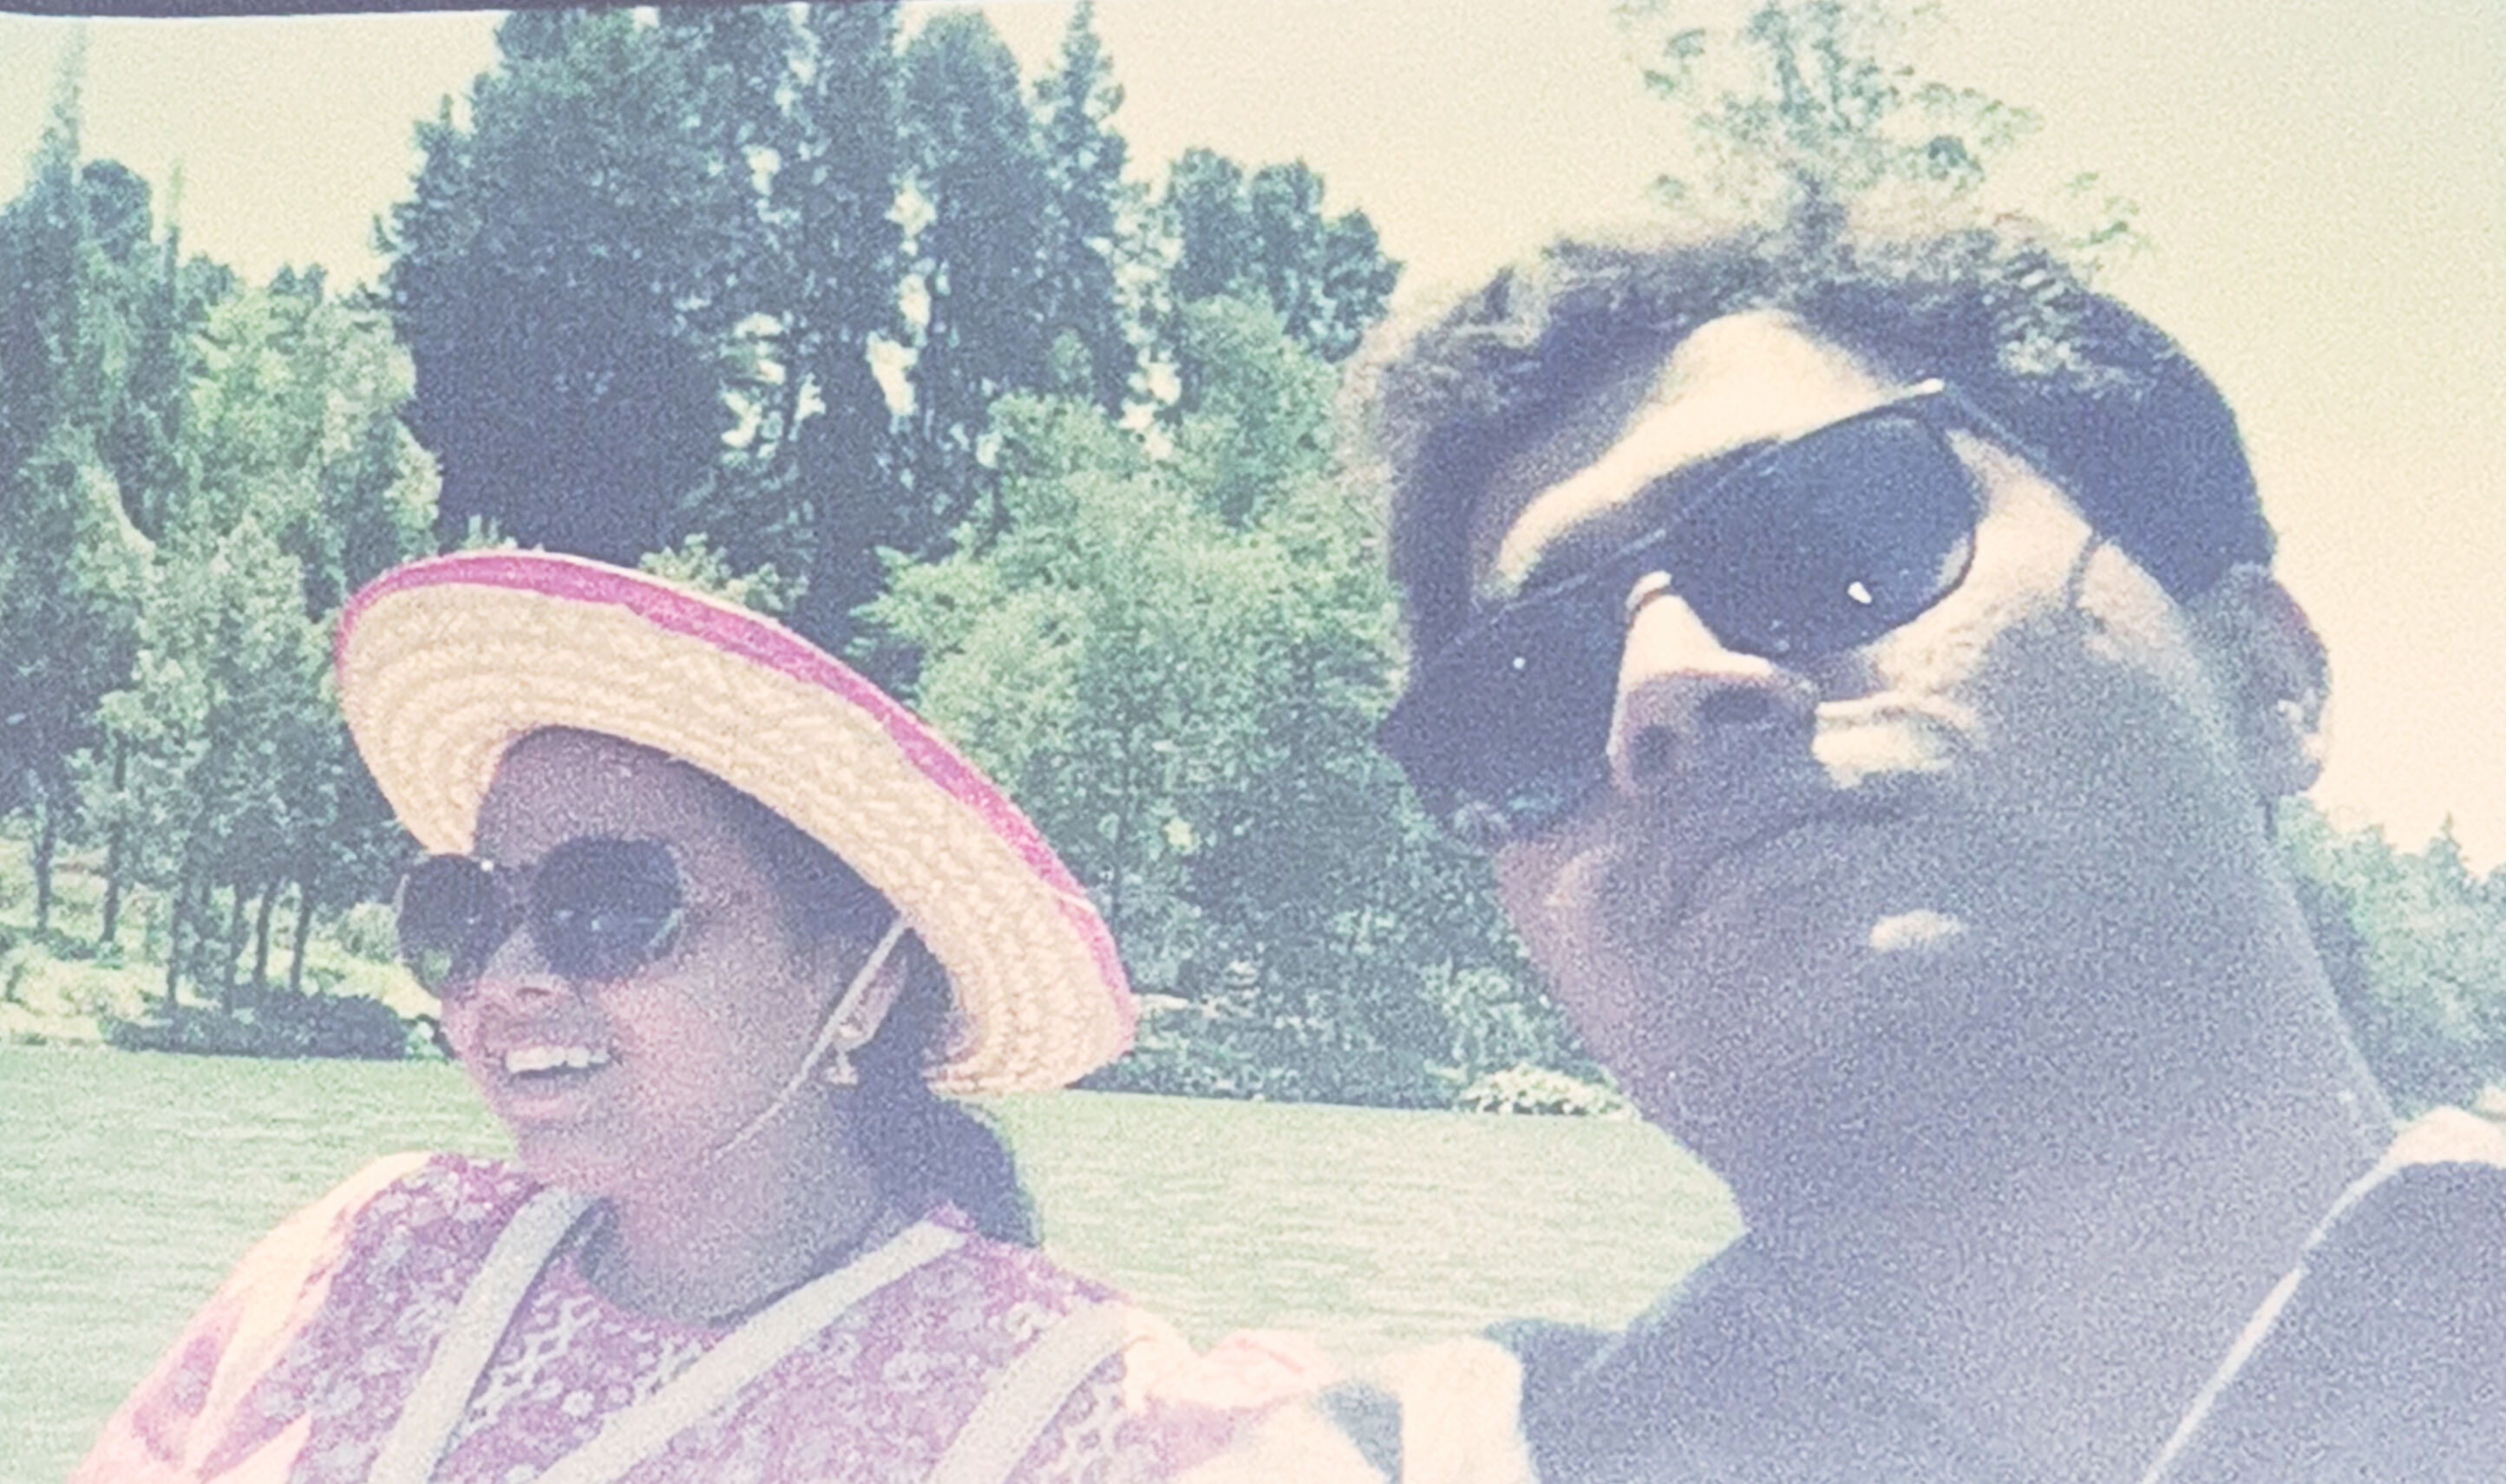 this is my first Selfie.. taken with Hotshot camera in March 1994  @ooty India 